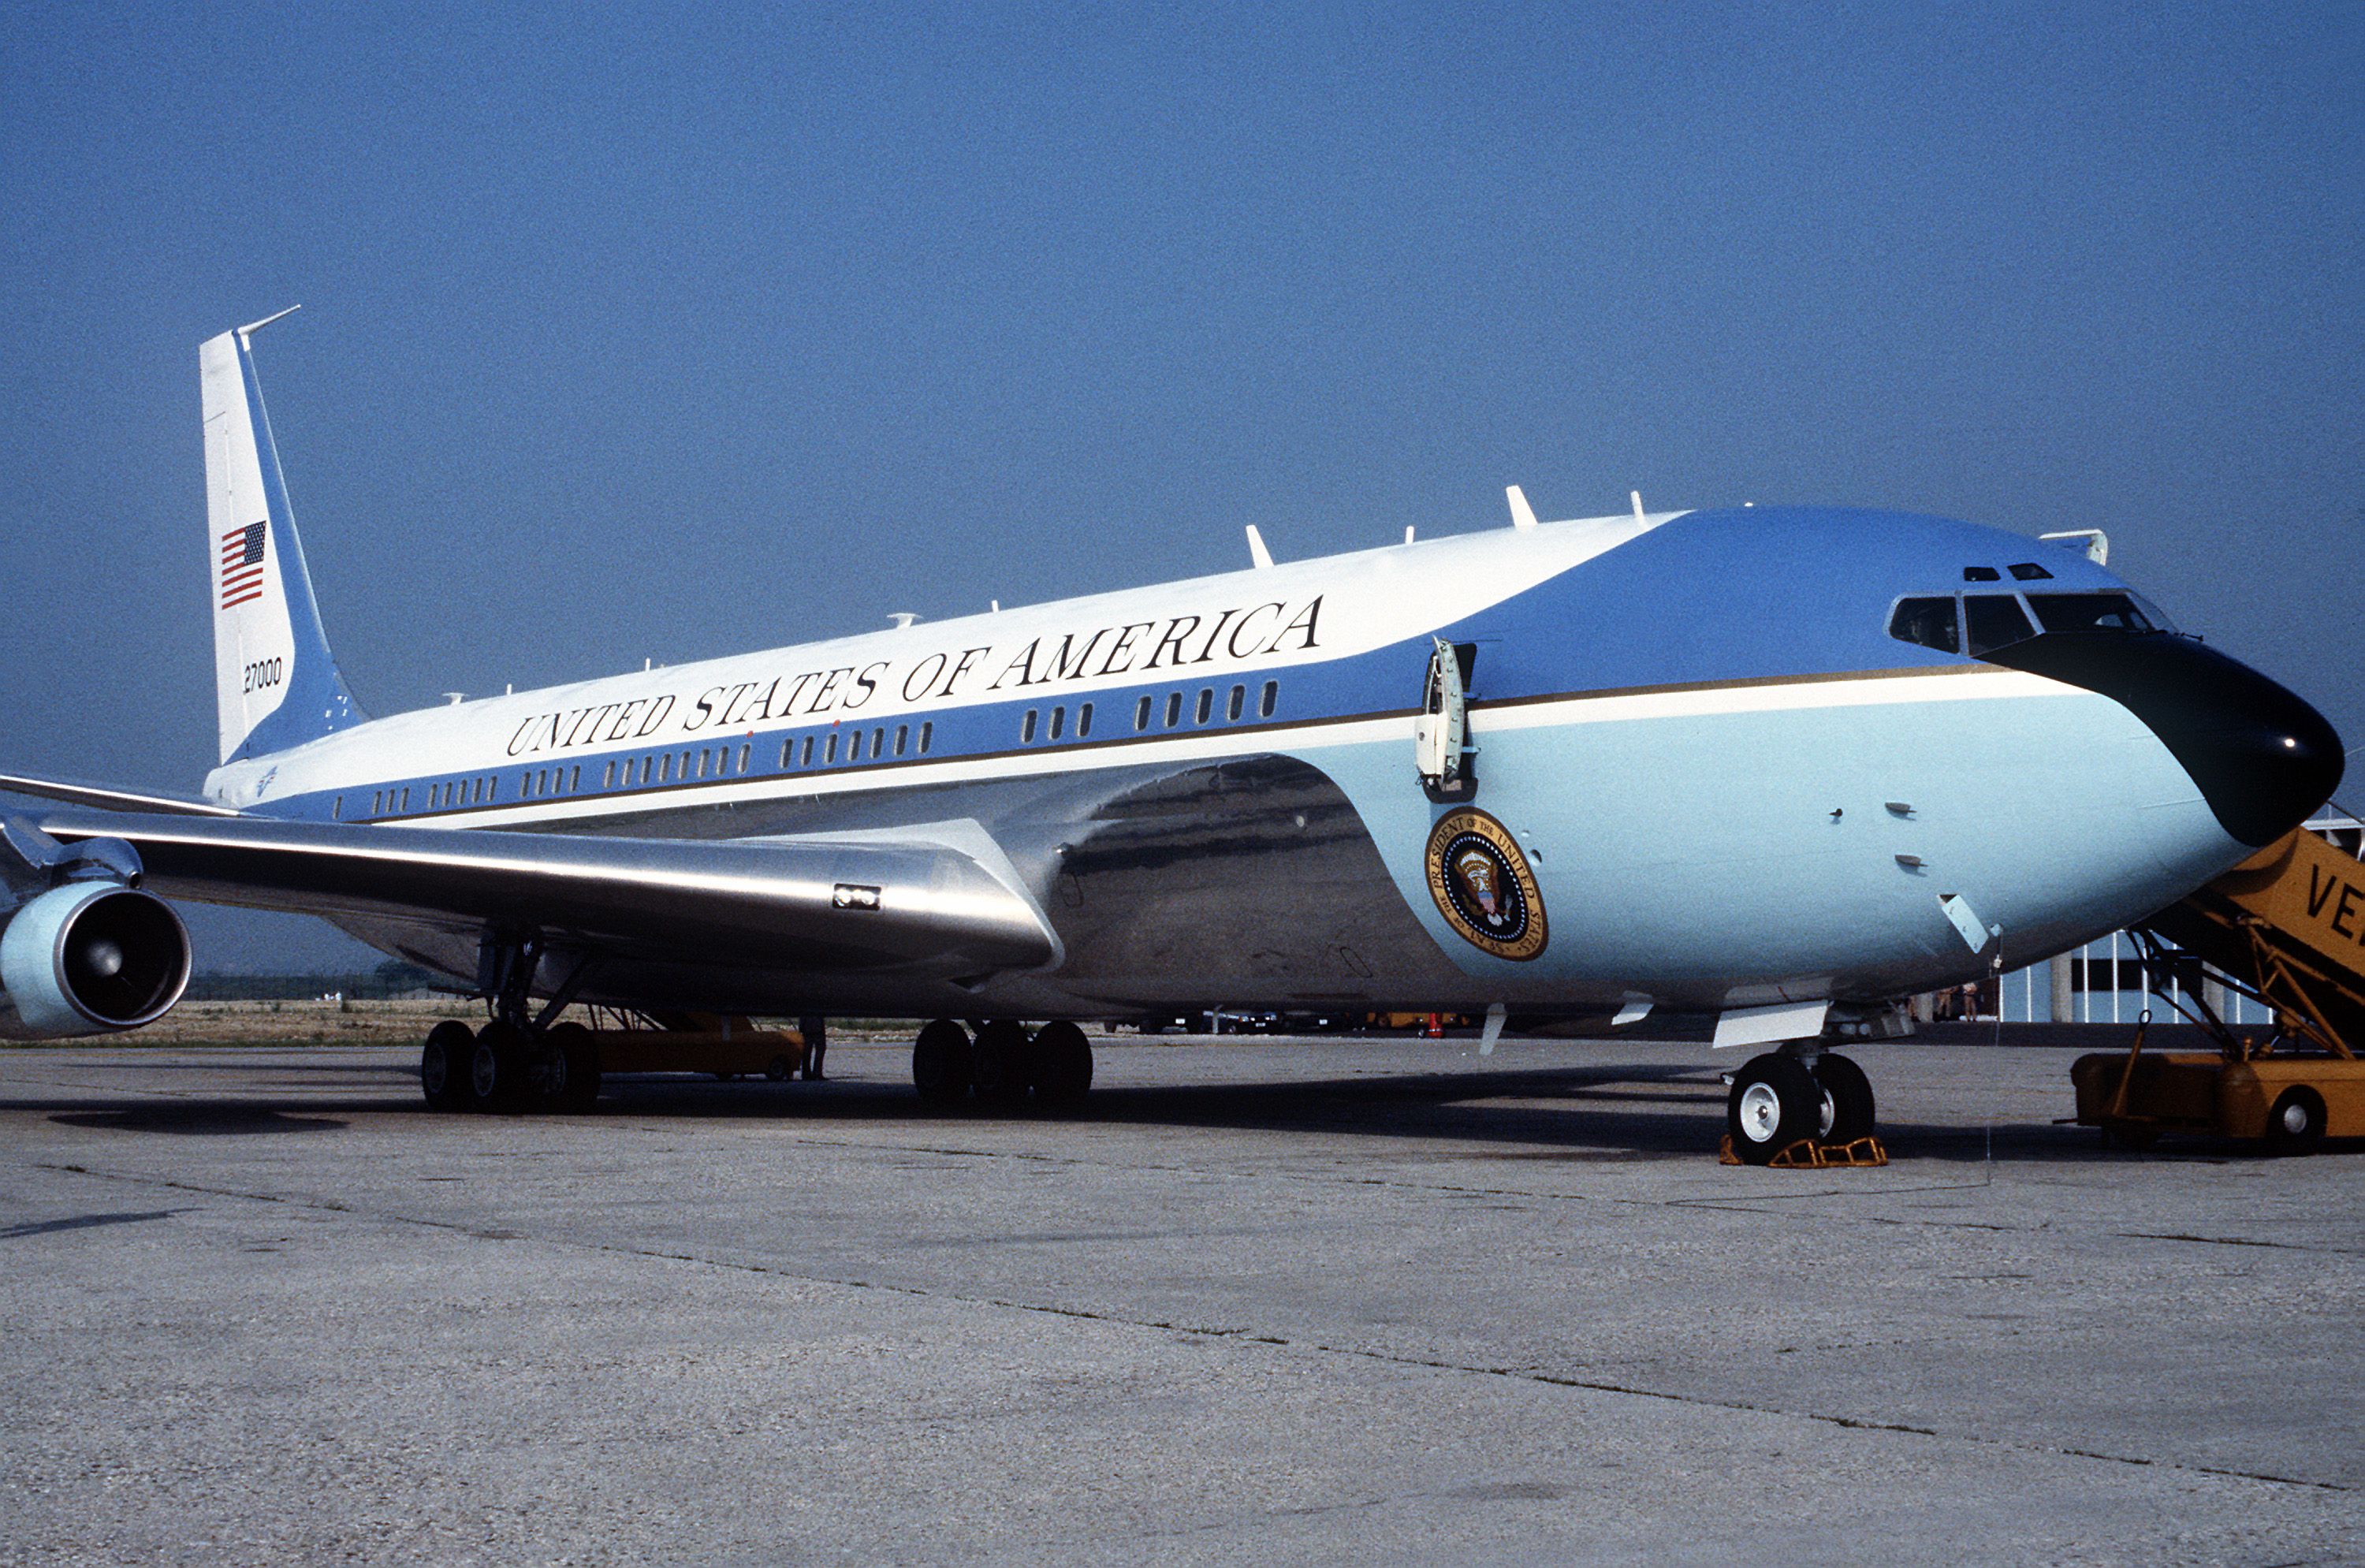 C-137 Air Force One